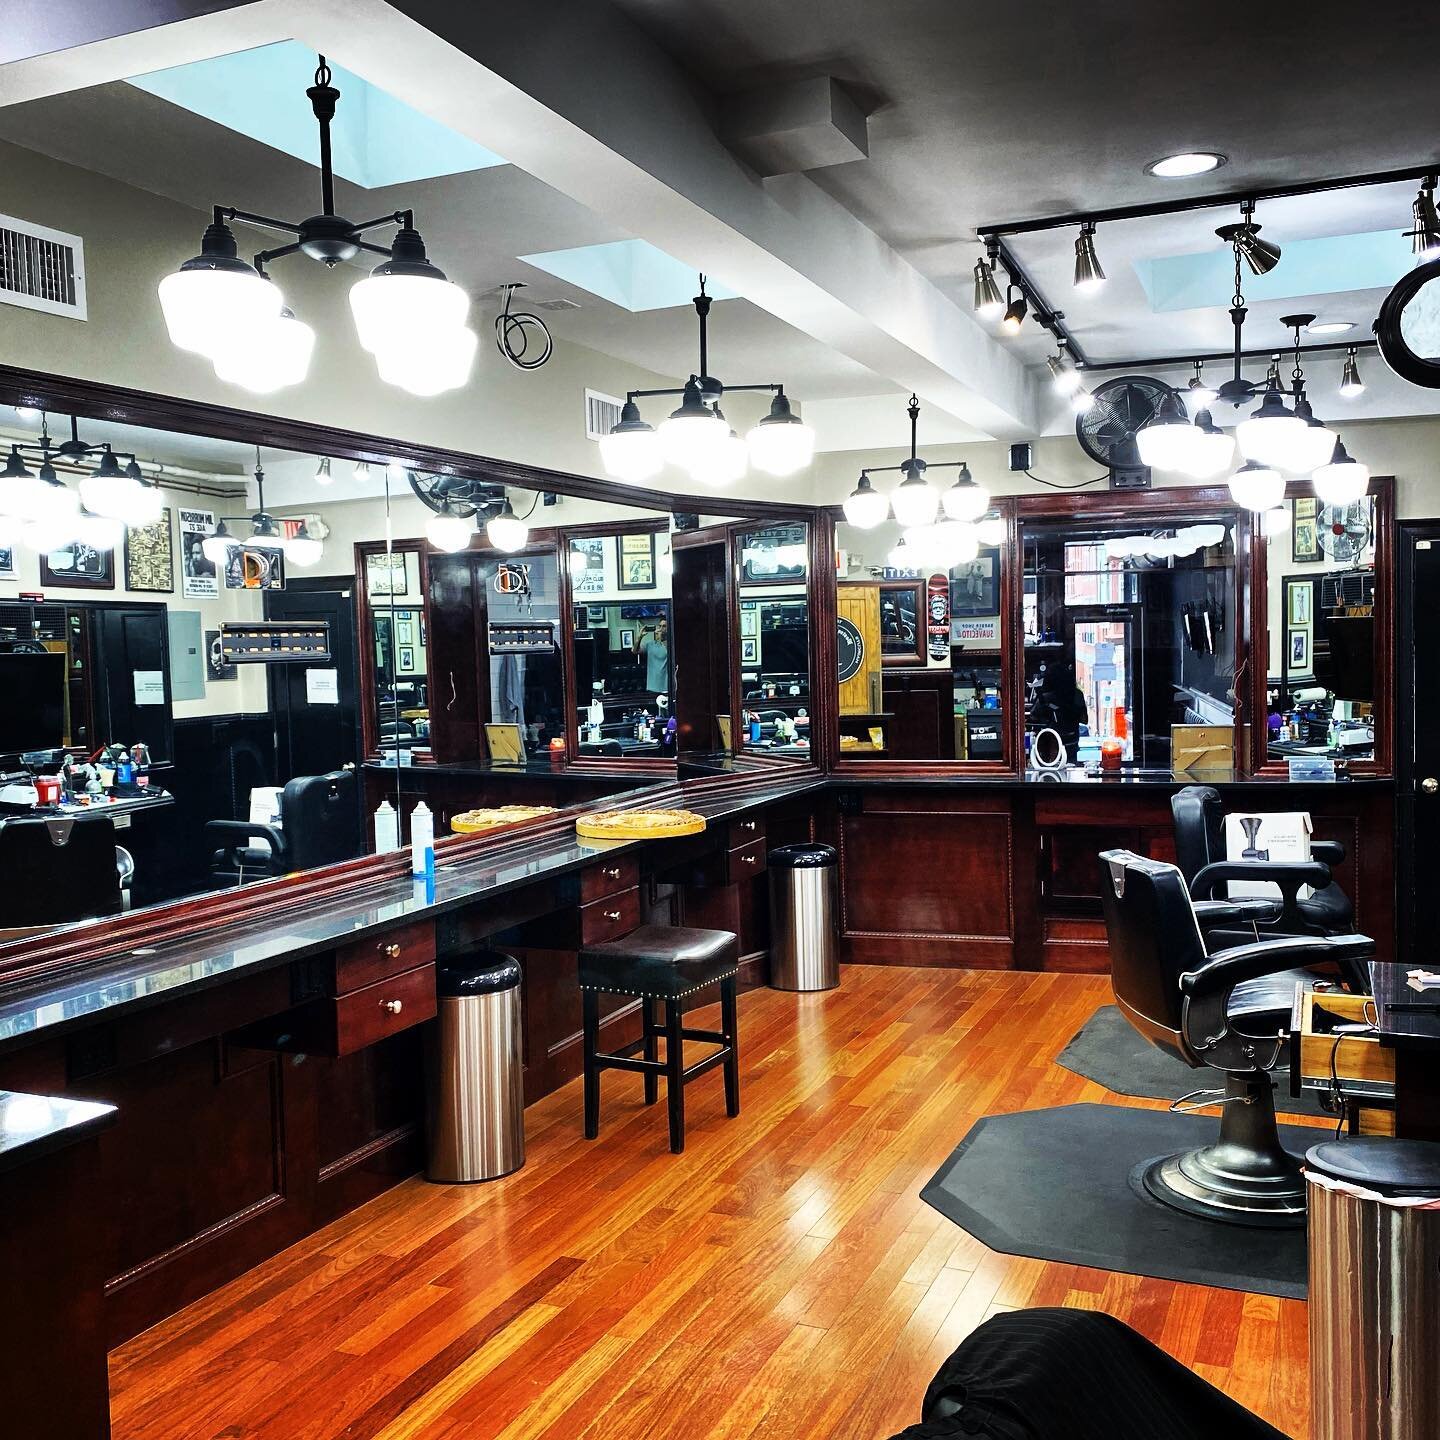 We have expanded 5 times since 2007. Check out the newest edition to the penthouse of the barber shop. Thanks again to @michaeldello1 &amp; DelloRusso GC for another impossible beautiful job. One more room to go. #bostonbarber #bostontattoo #boston #